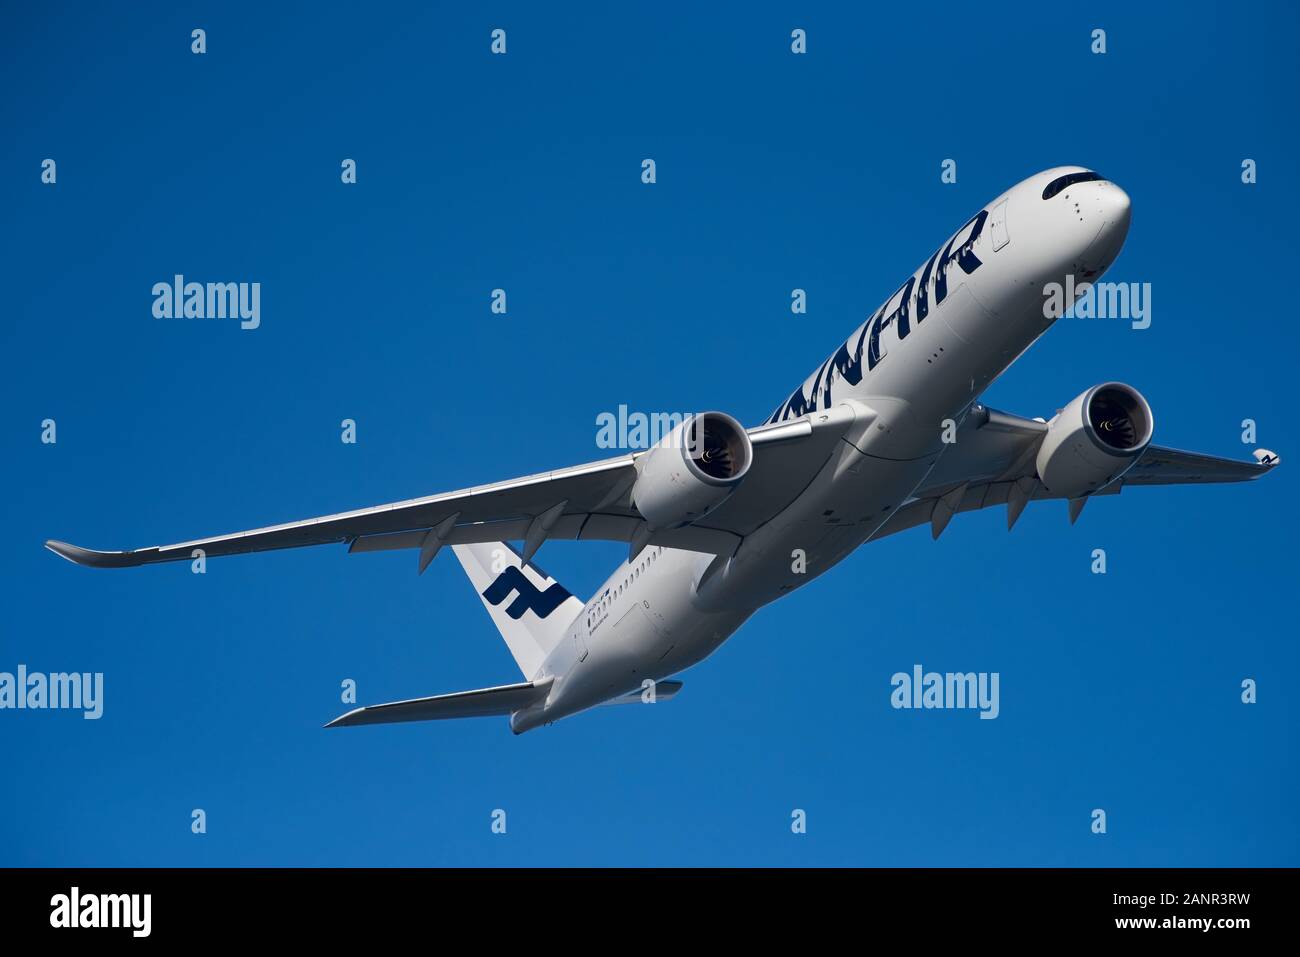 Helsinki, Finland - 9 June 2017: Finnair Airbus A350 XWB airliner flying on blue sky over Helsinki at the Kaivopuisto Air Show 2017 Stock Photo